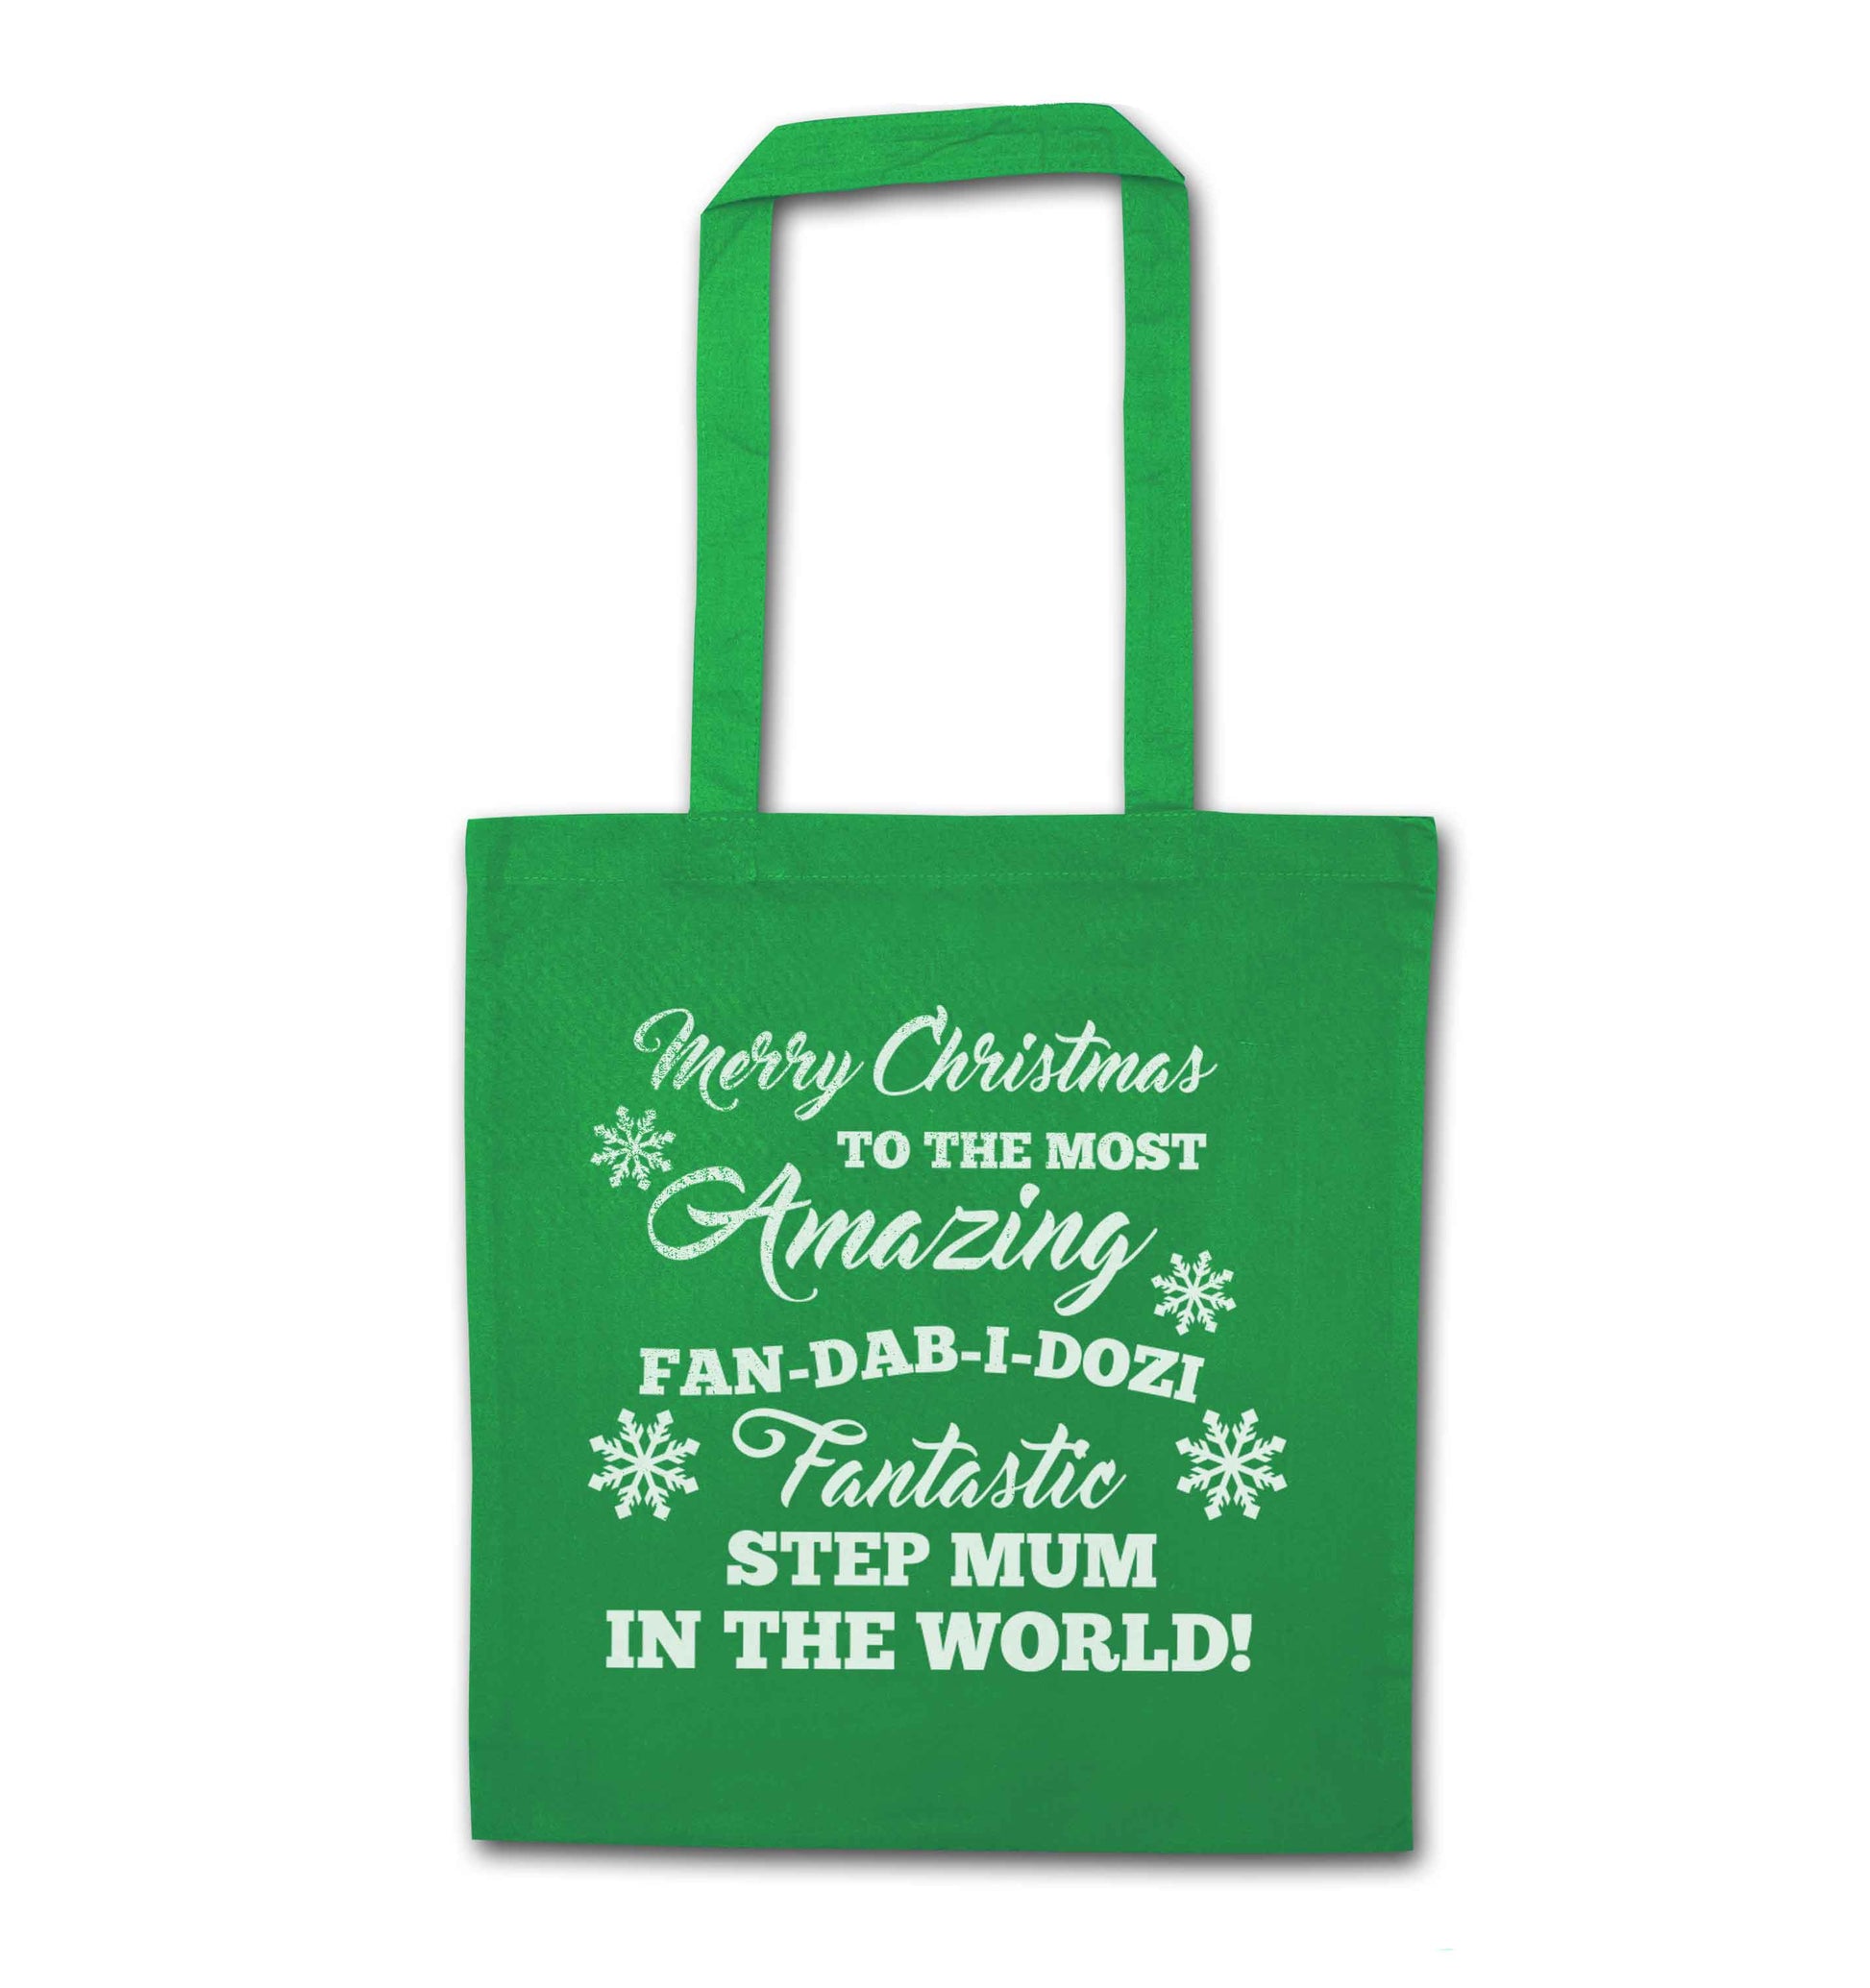 Merry Christmas to the most amazing fan-dab-i-dozi fantasic Step Mum in the world green tote bag